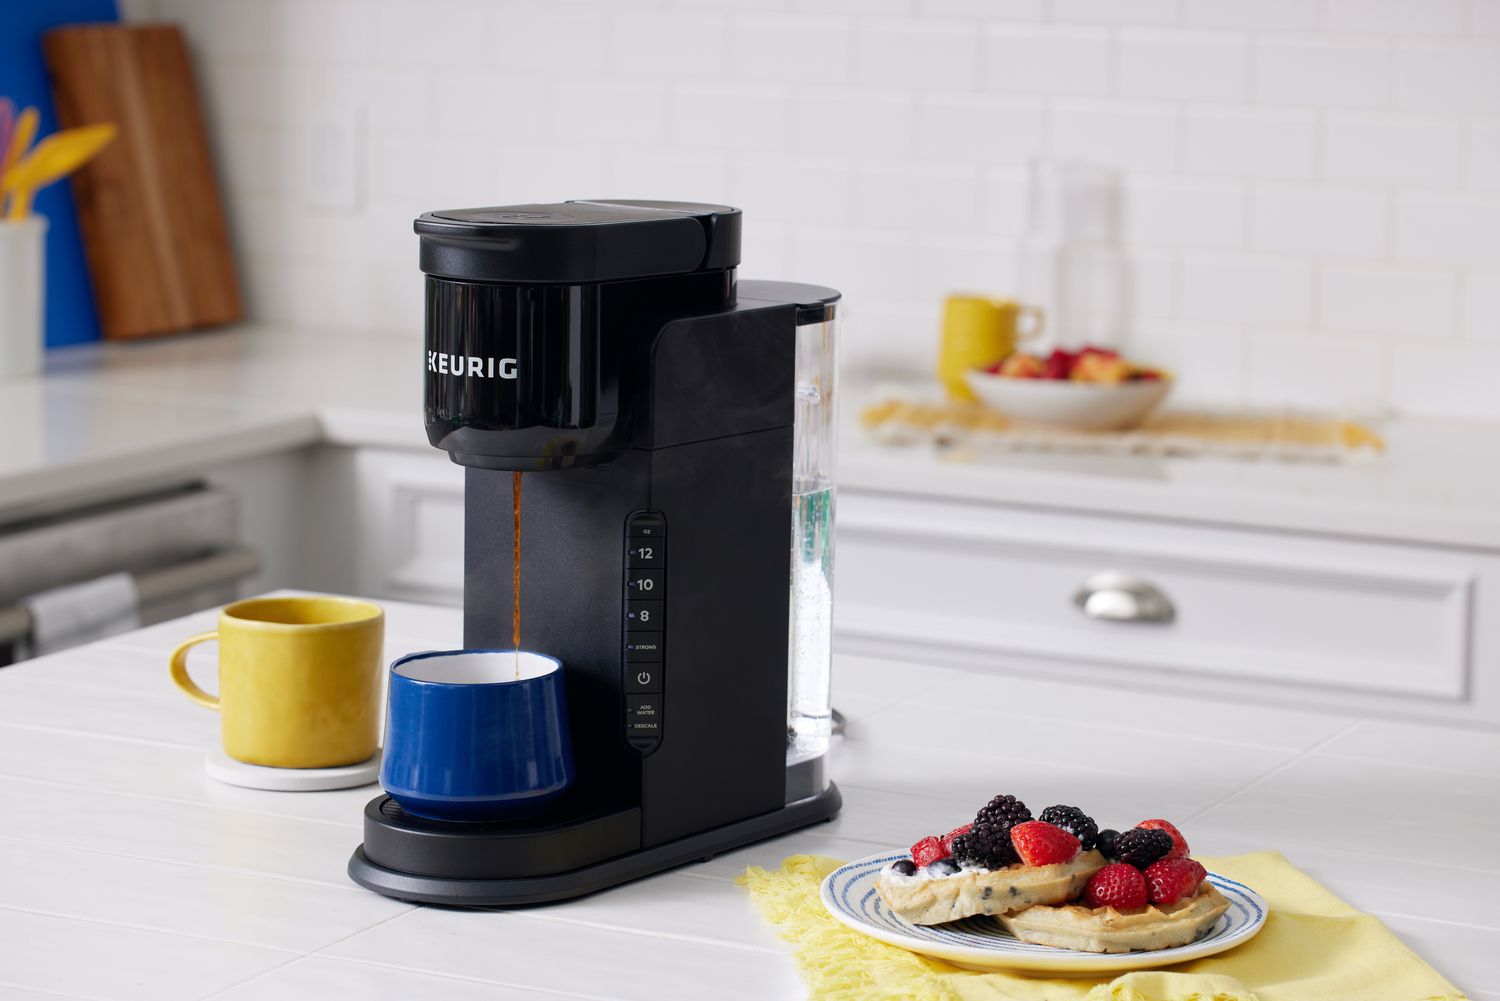 Keurig K-Express Single Serve Coffee Maker sits on counter next to breakfast dish